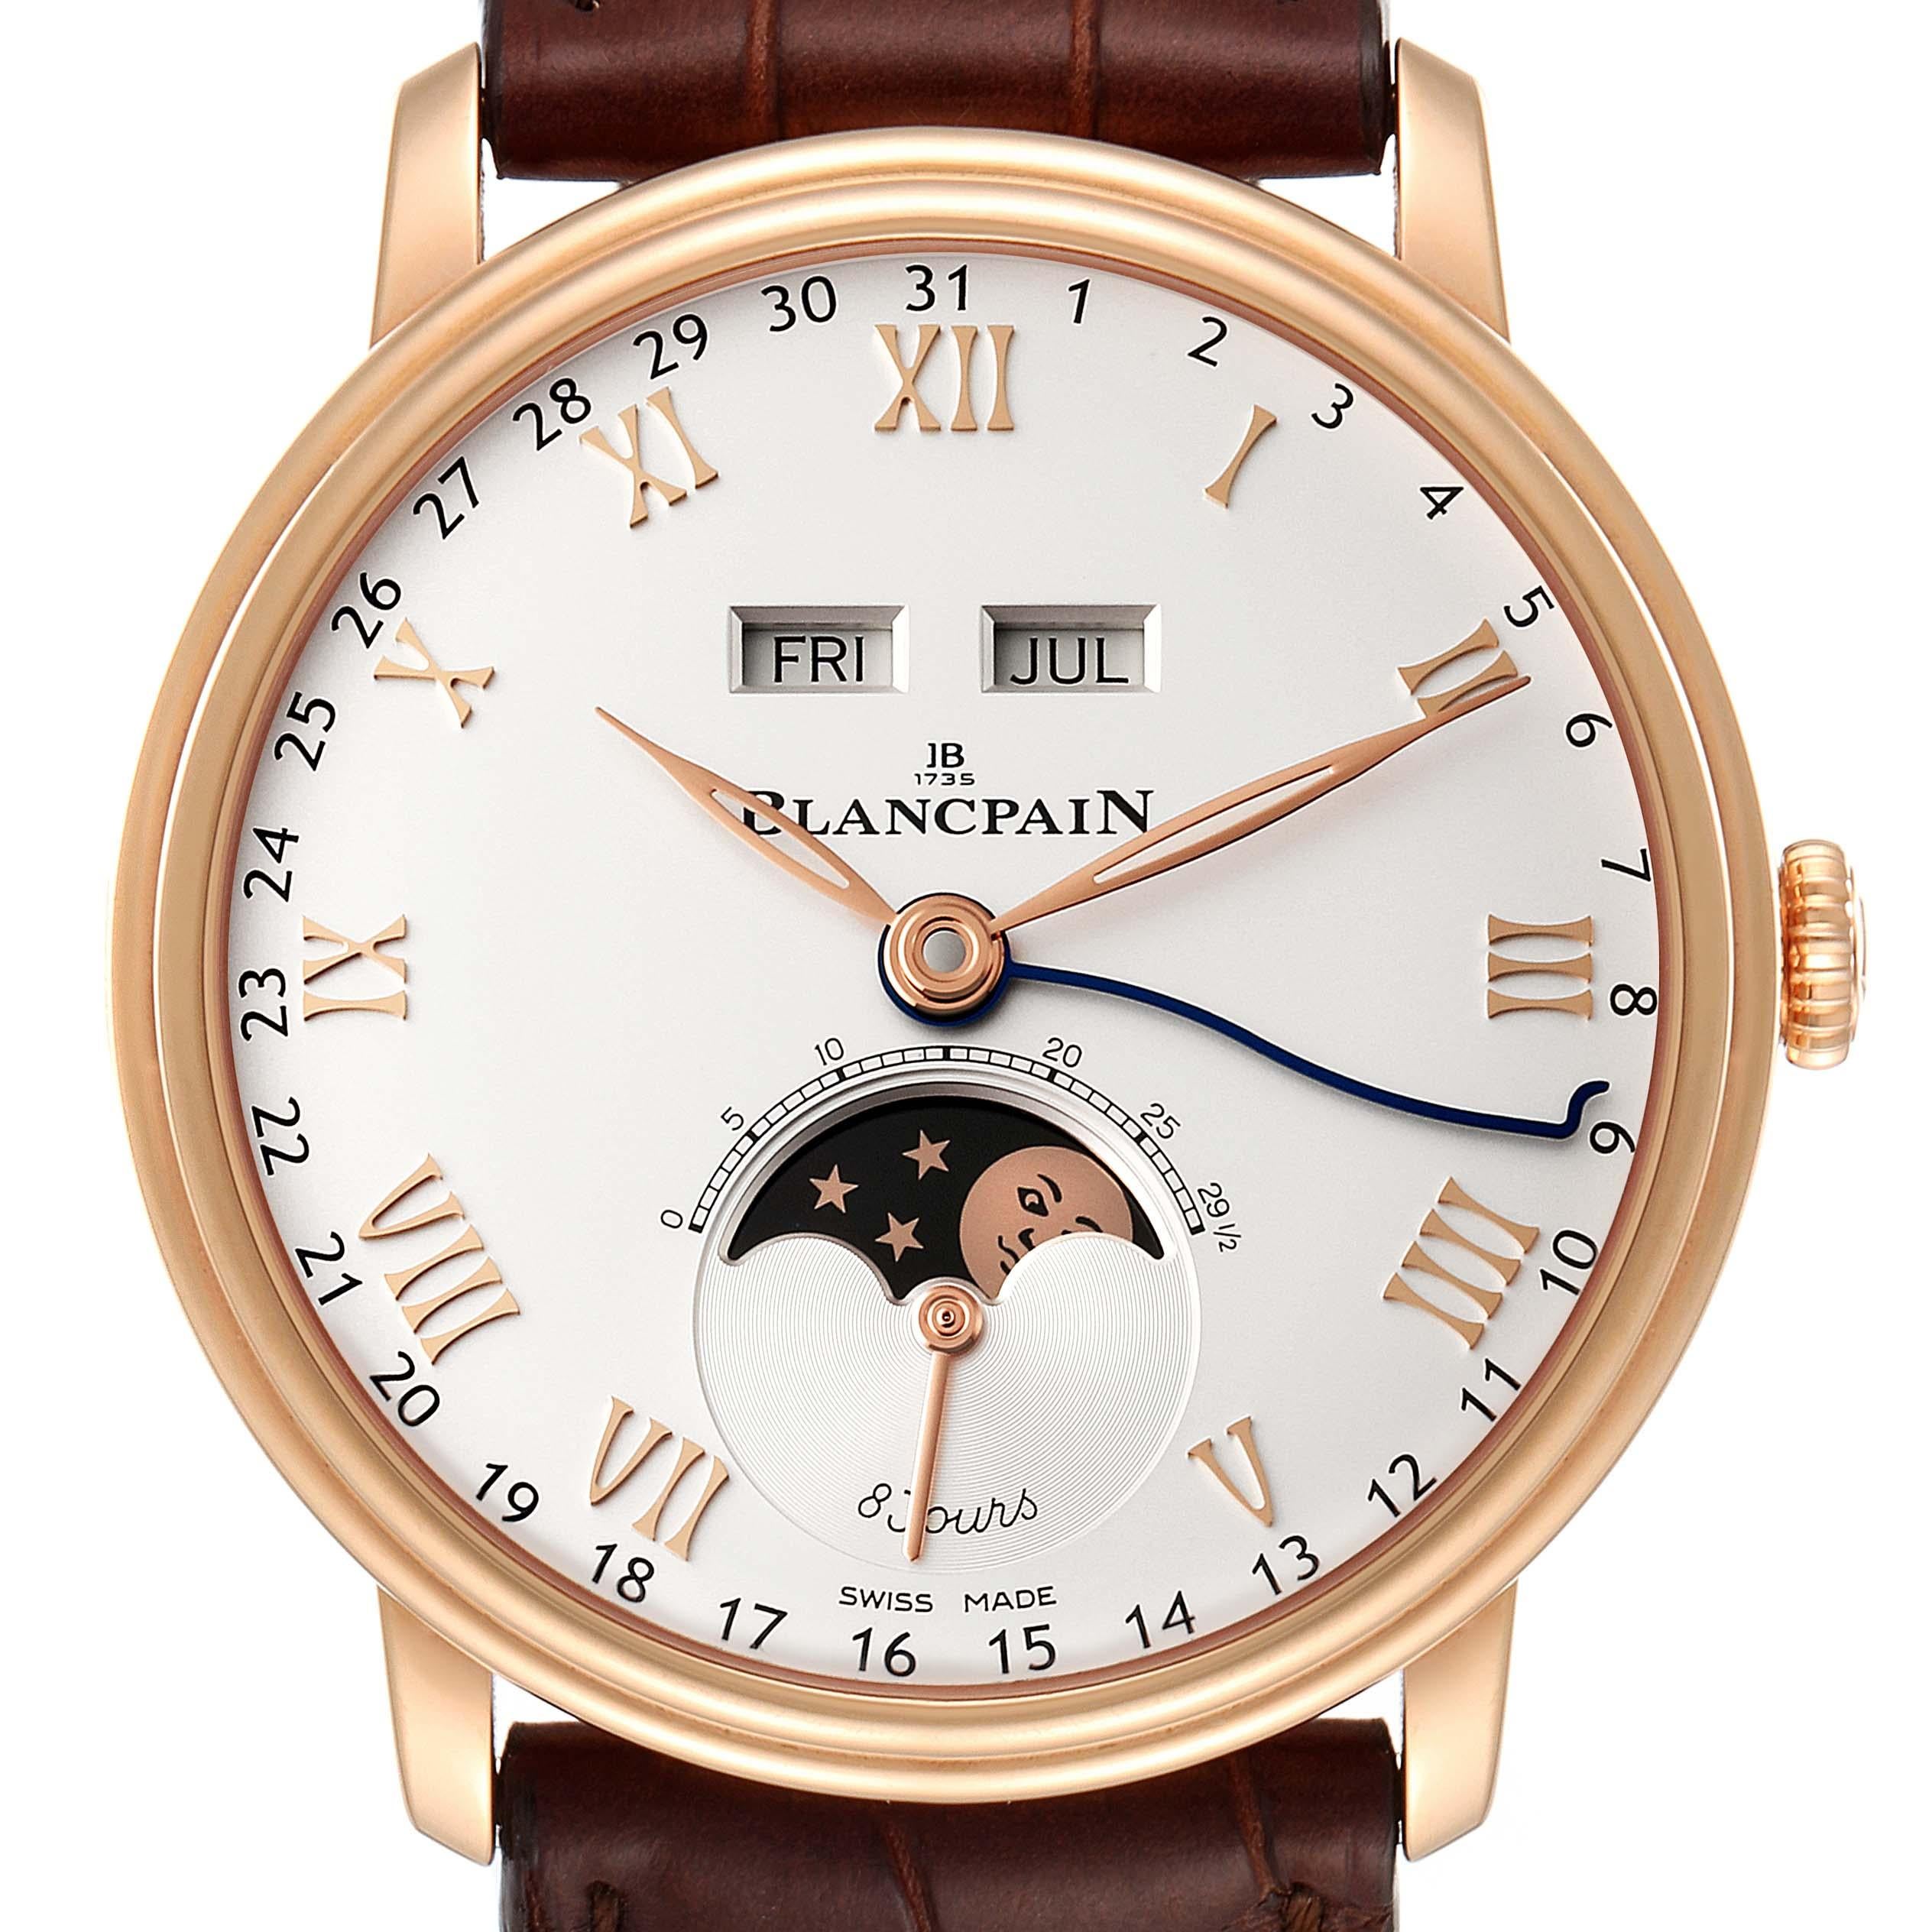 Blancpain Villeret Complete Calendar 8 Days Rose Gold Watch 6639 Box Papers. Automatic self-winding movement. Functions: full calendar, moon phase, column wheel, date, day, hour, minute, second. 18K rose gold case 42.0 mm in diameter. Case